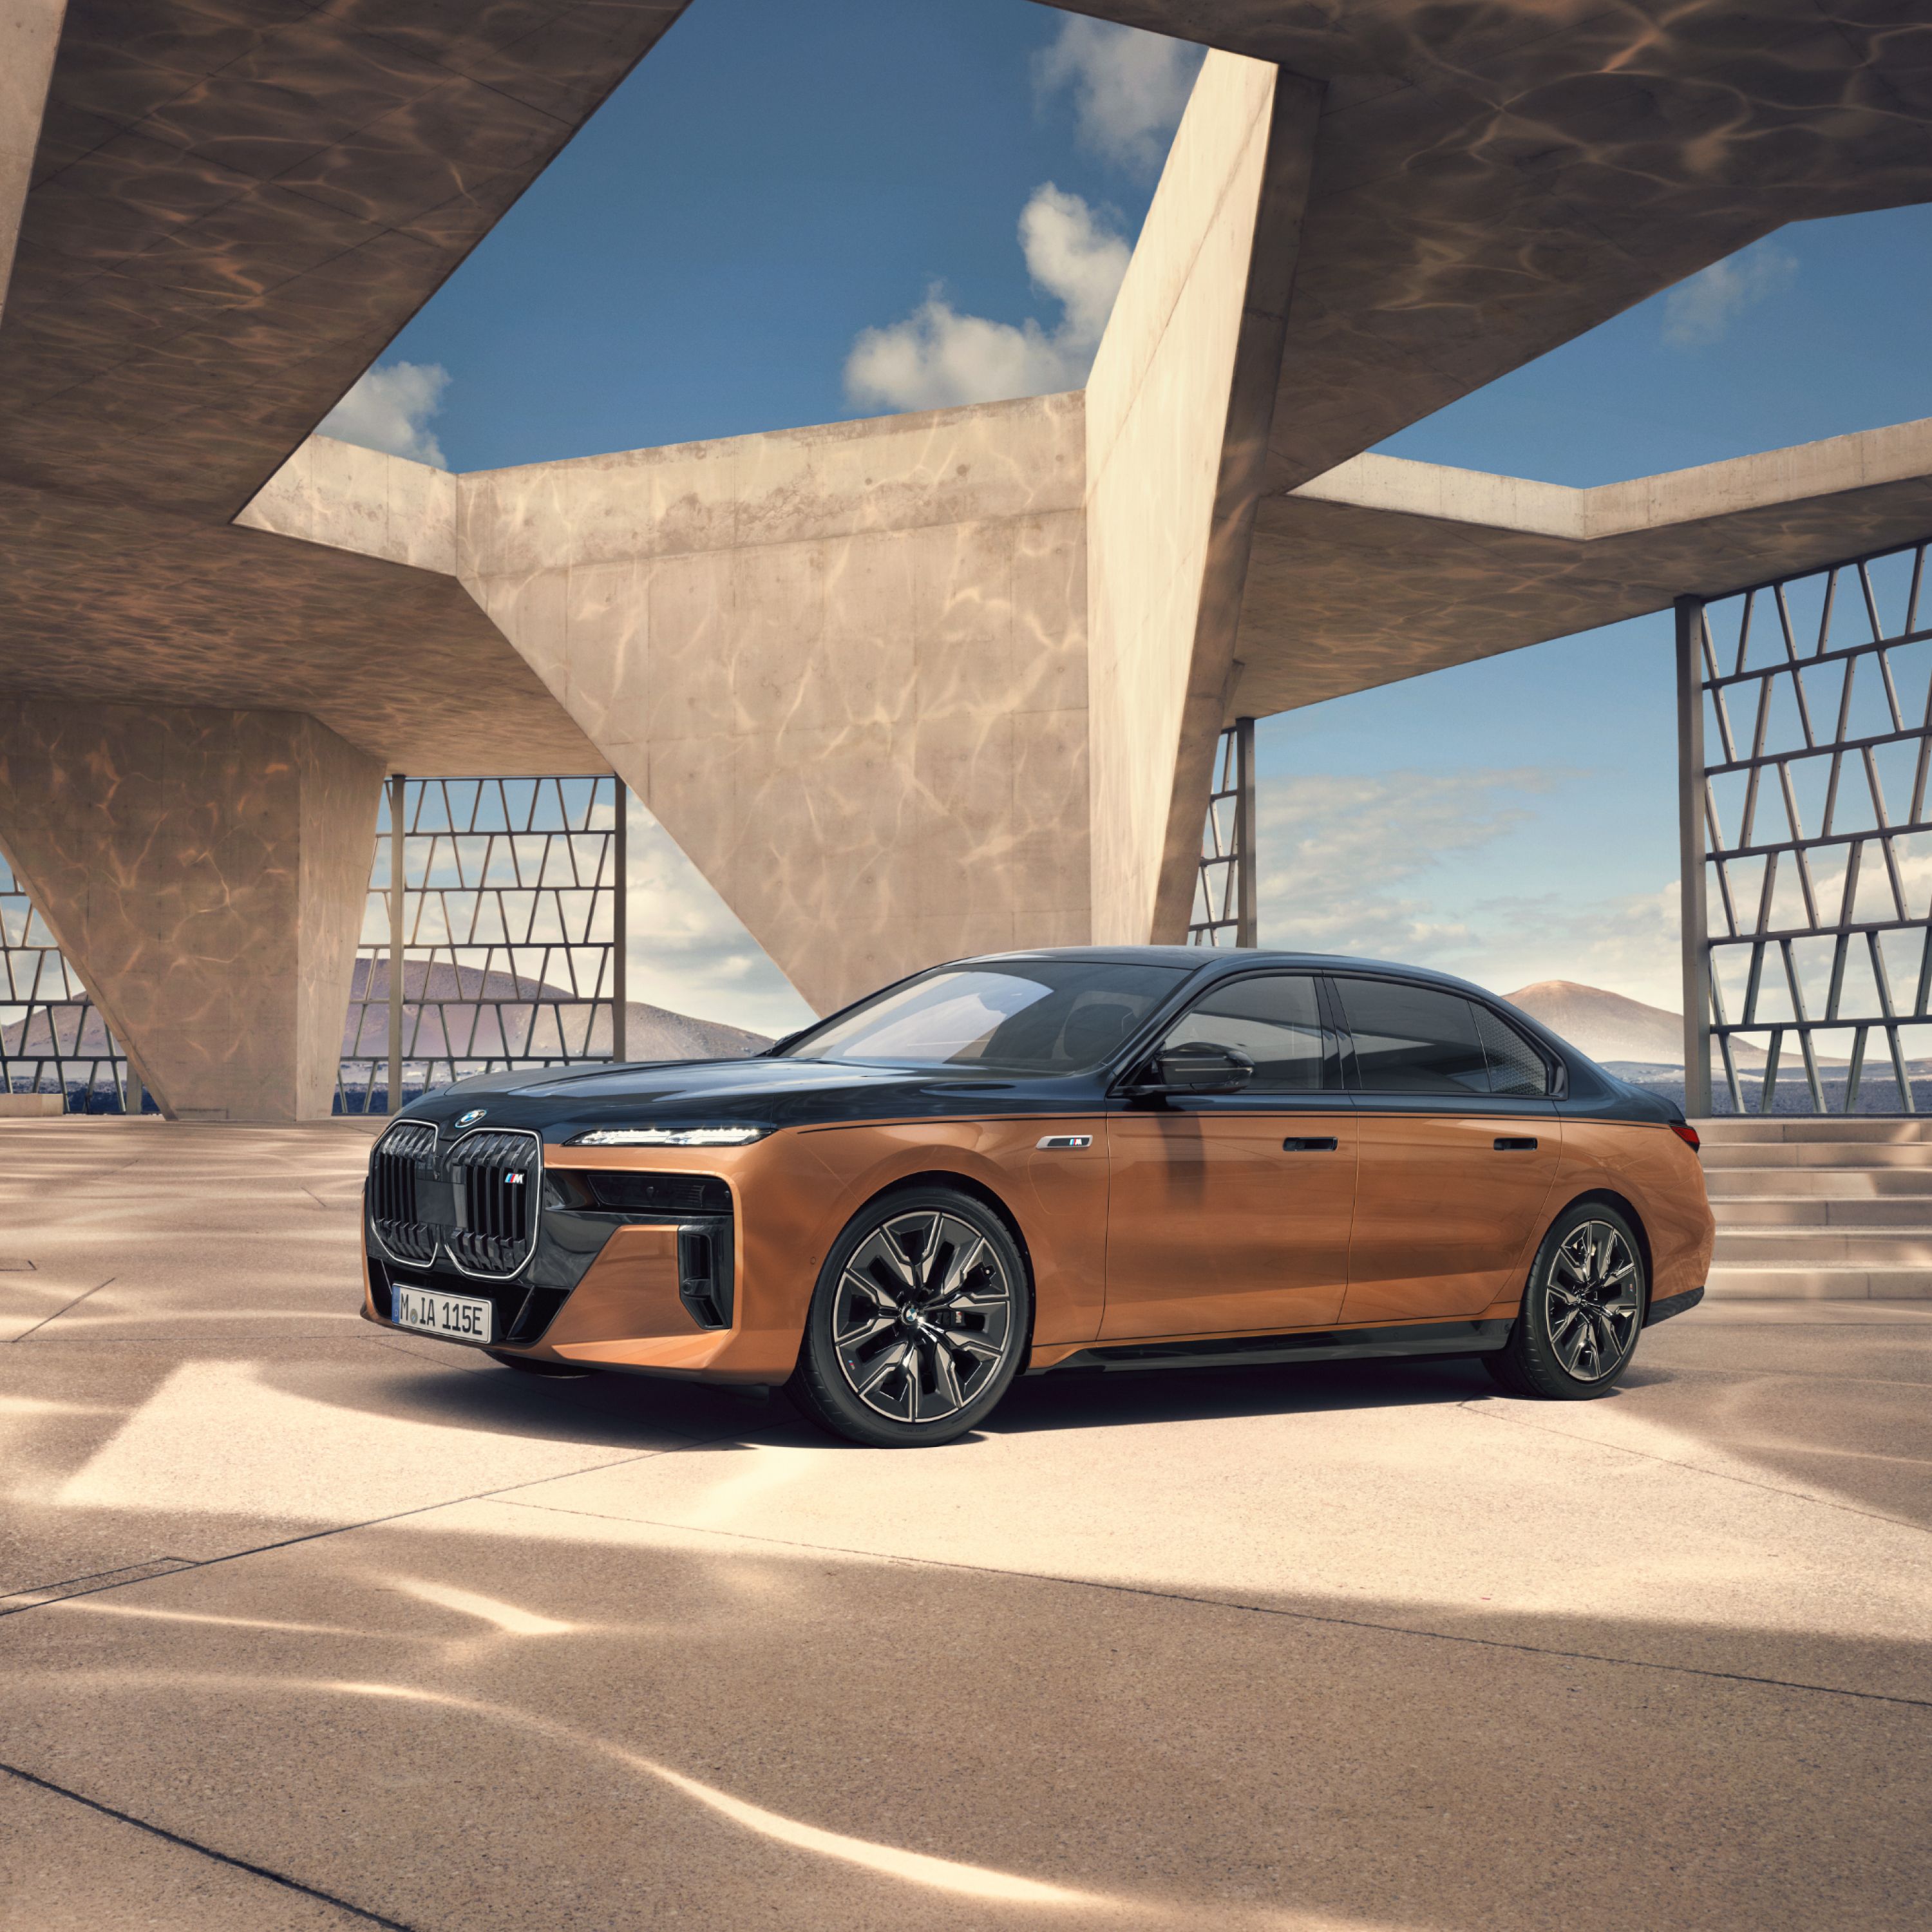 BMW i7 M70 xDrive Sedan in Individual Two-Tone paint in a modern architectural construction with a mountain panorama in the background